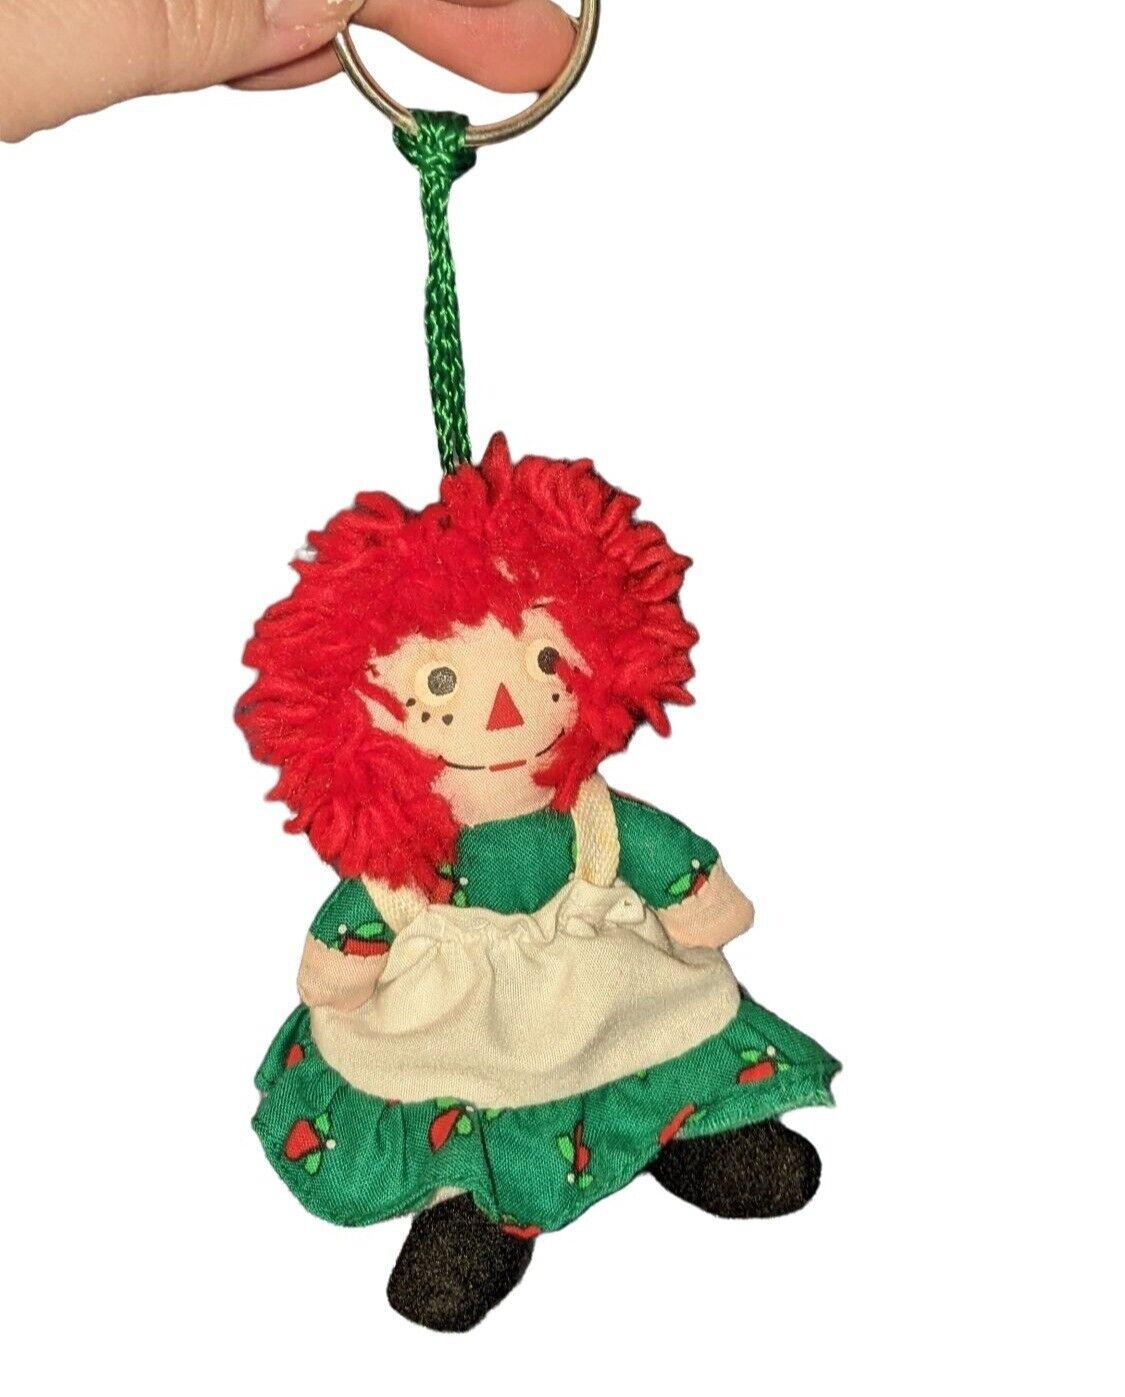 Vintage Rare Raggedy Anne Keychain by Snowden and Friends Target 1998